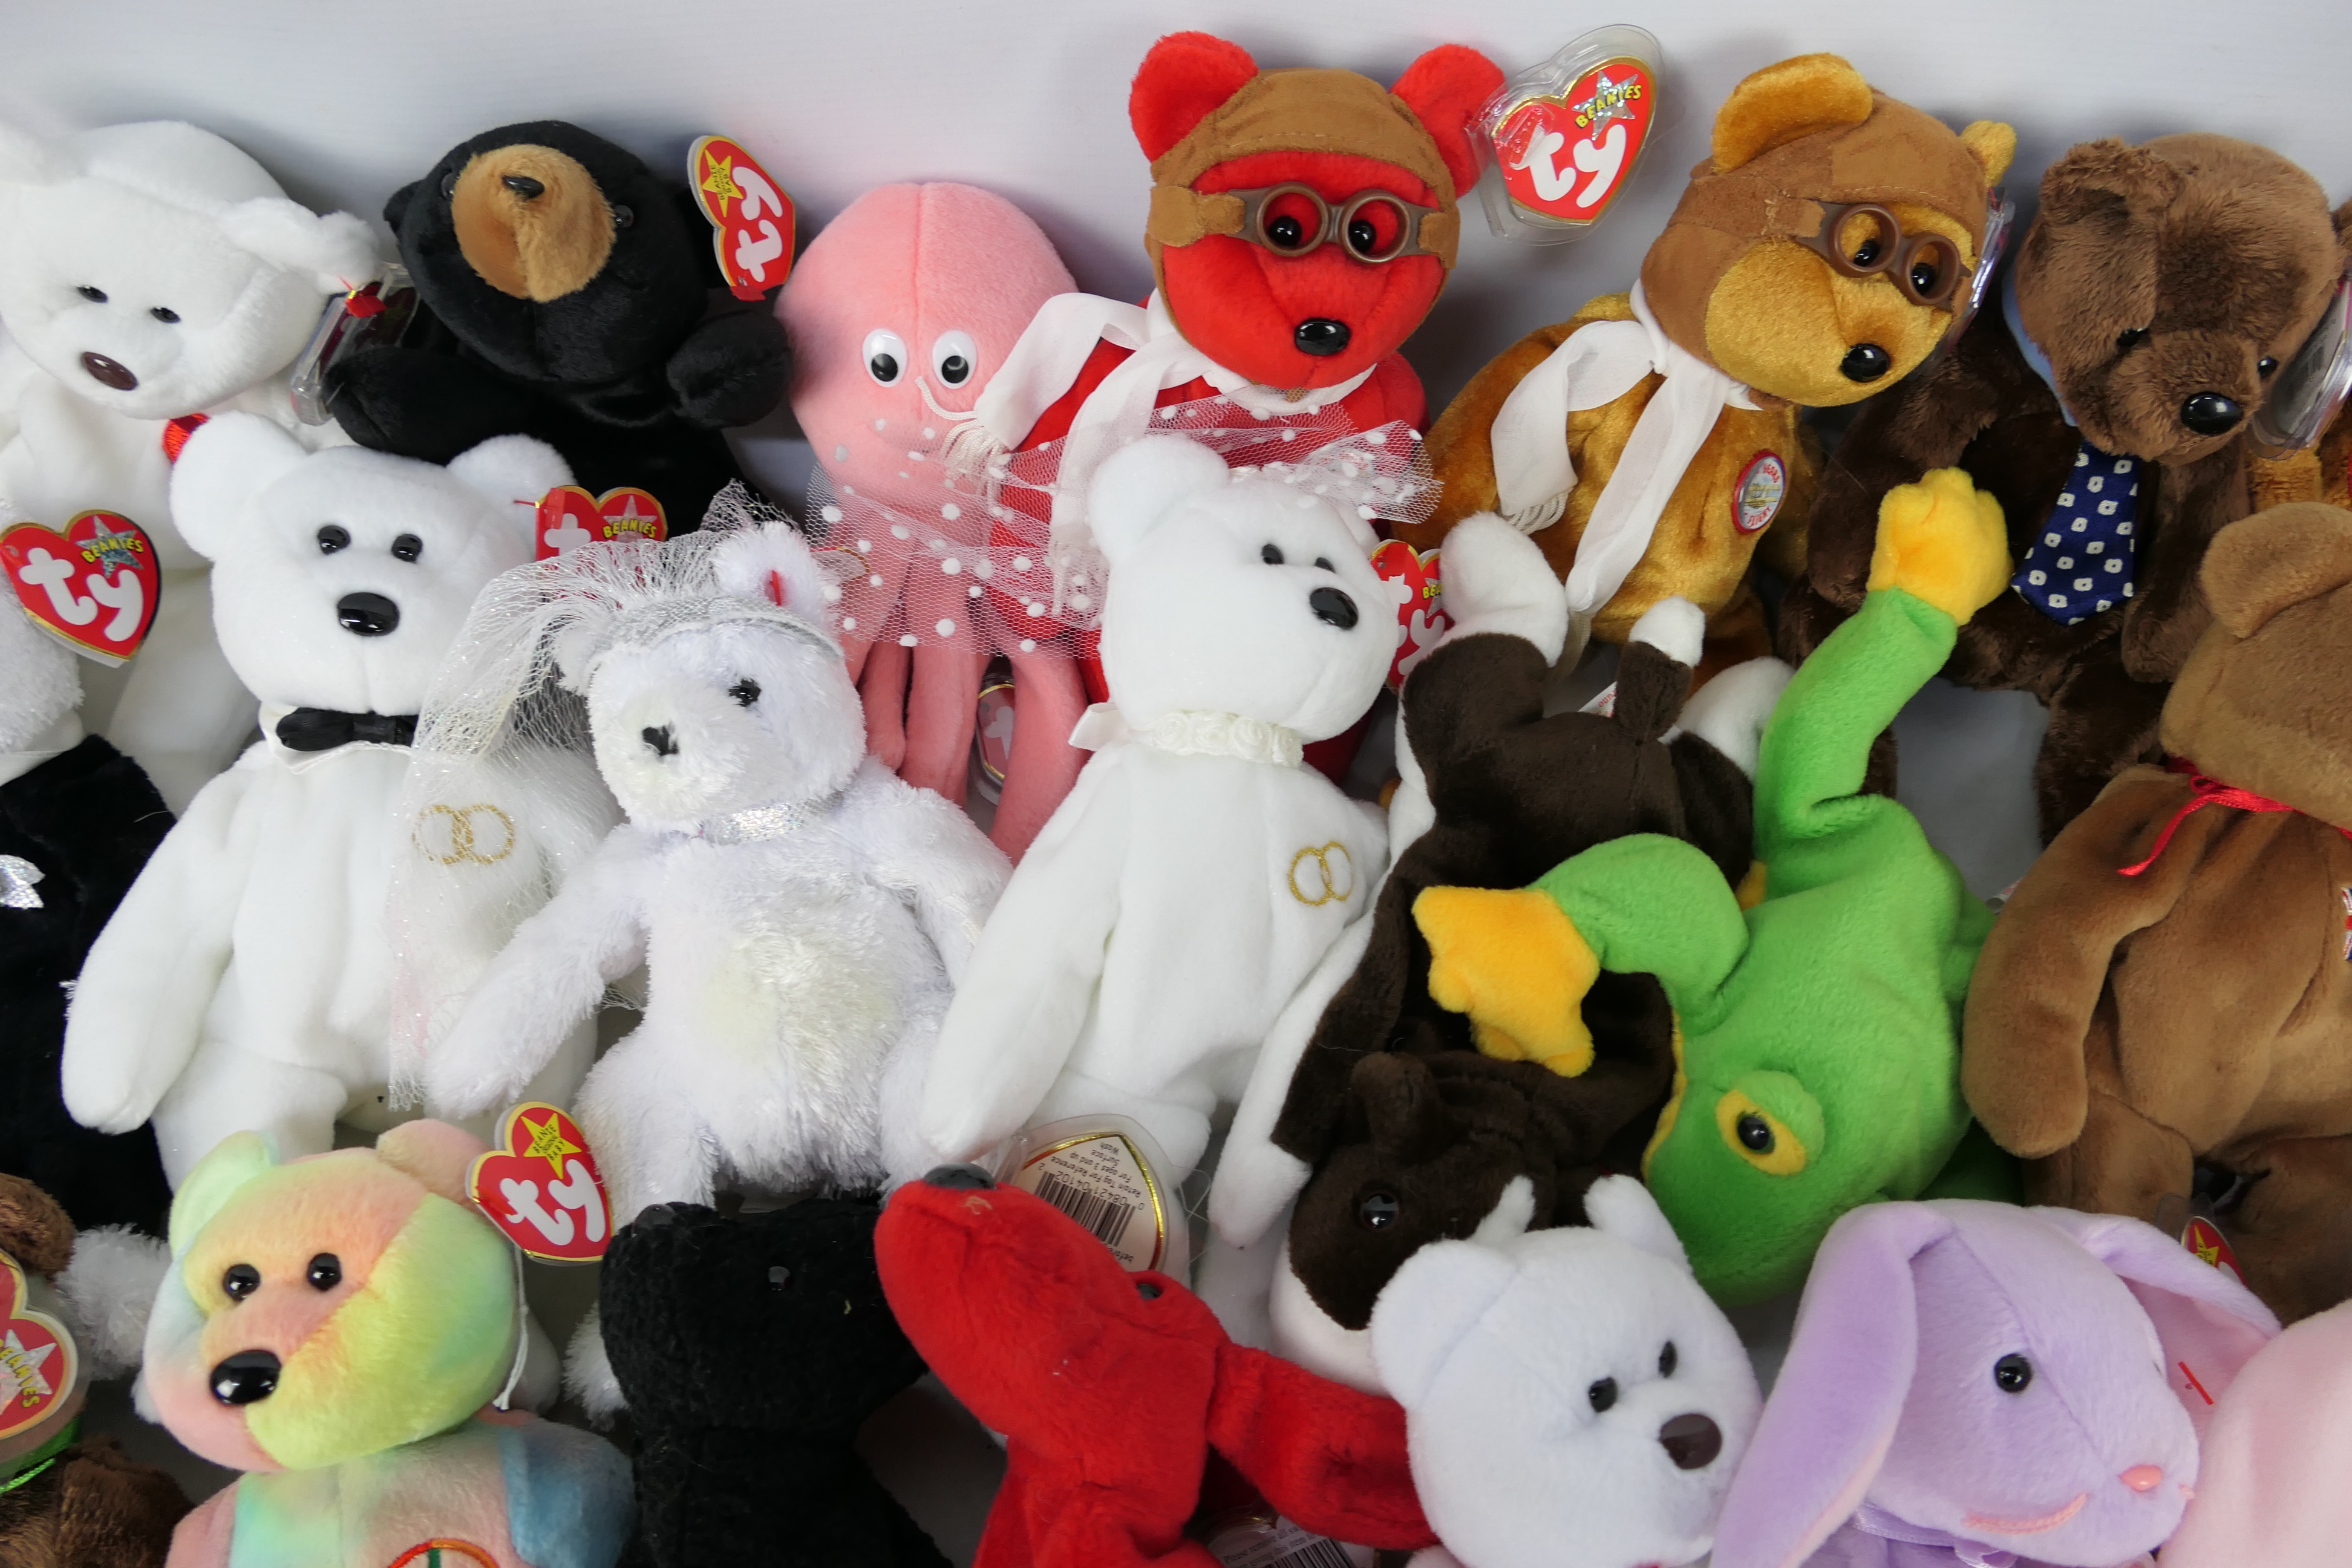 Ty - 36 x Ty Beanie Baby bears and soft toys - Lot includes 2 x Shakespeare-themed Beanie Baby - Image 5 of 5